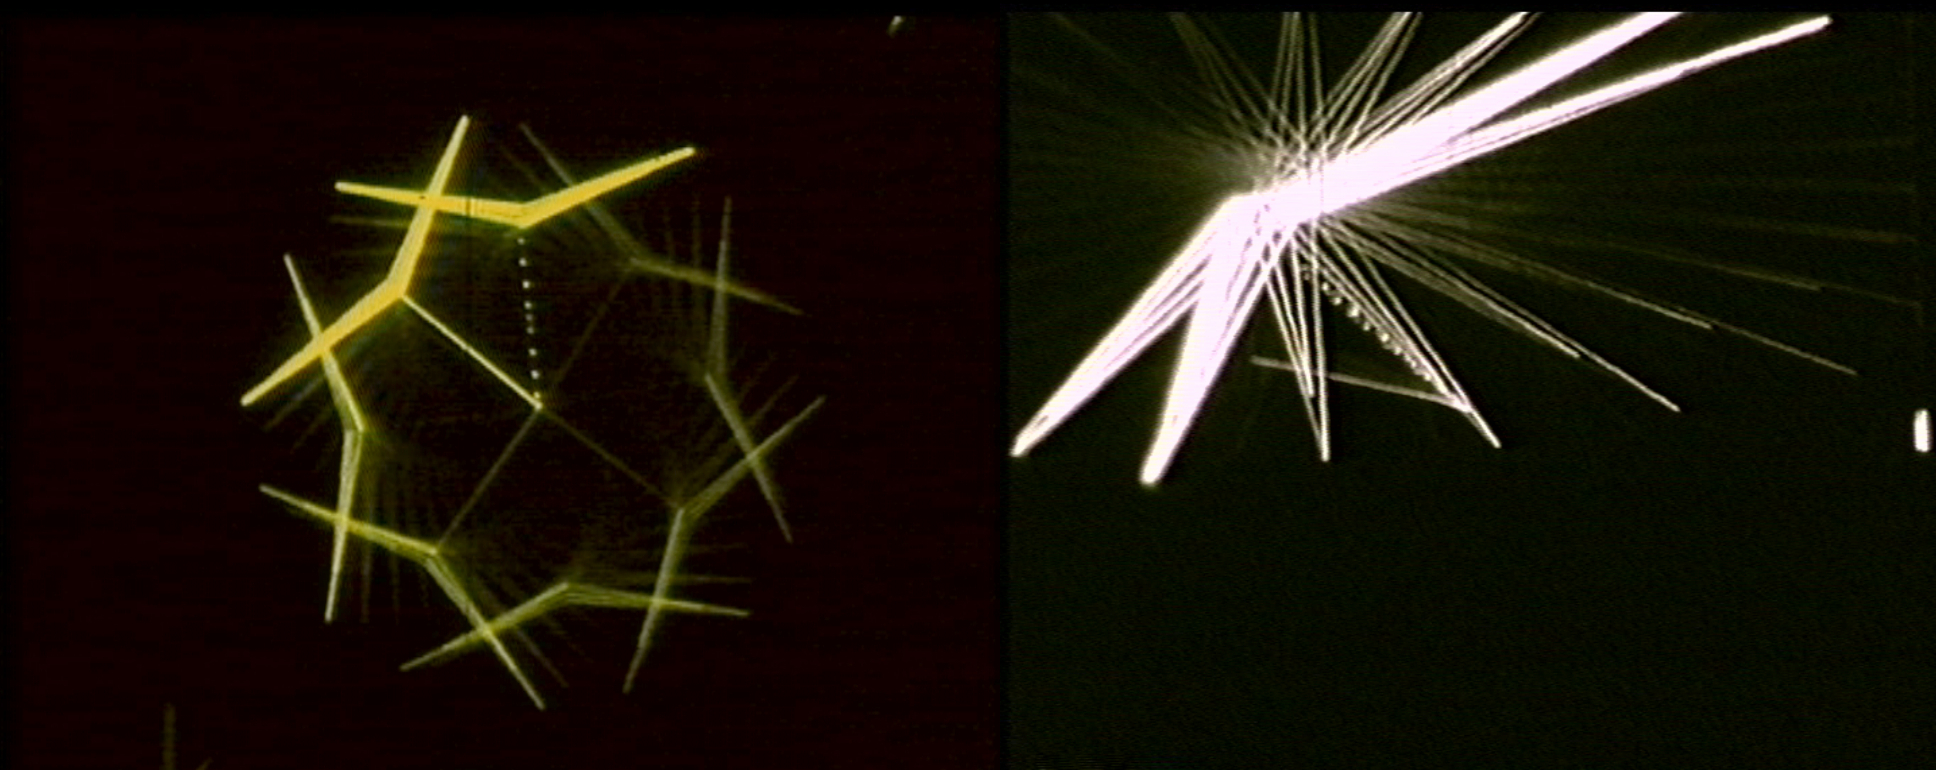 Two frames of the Rotating Boomerang